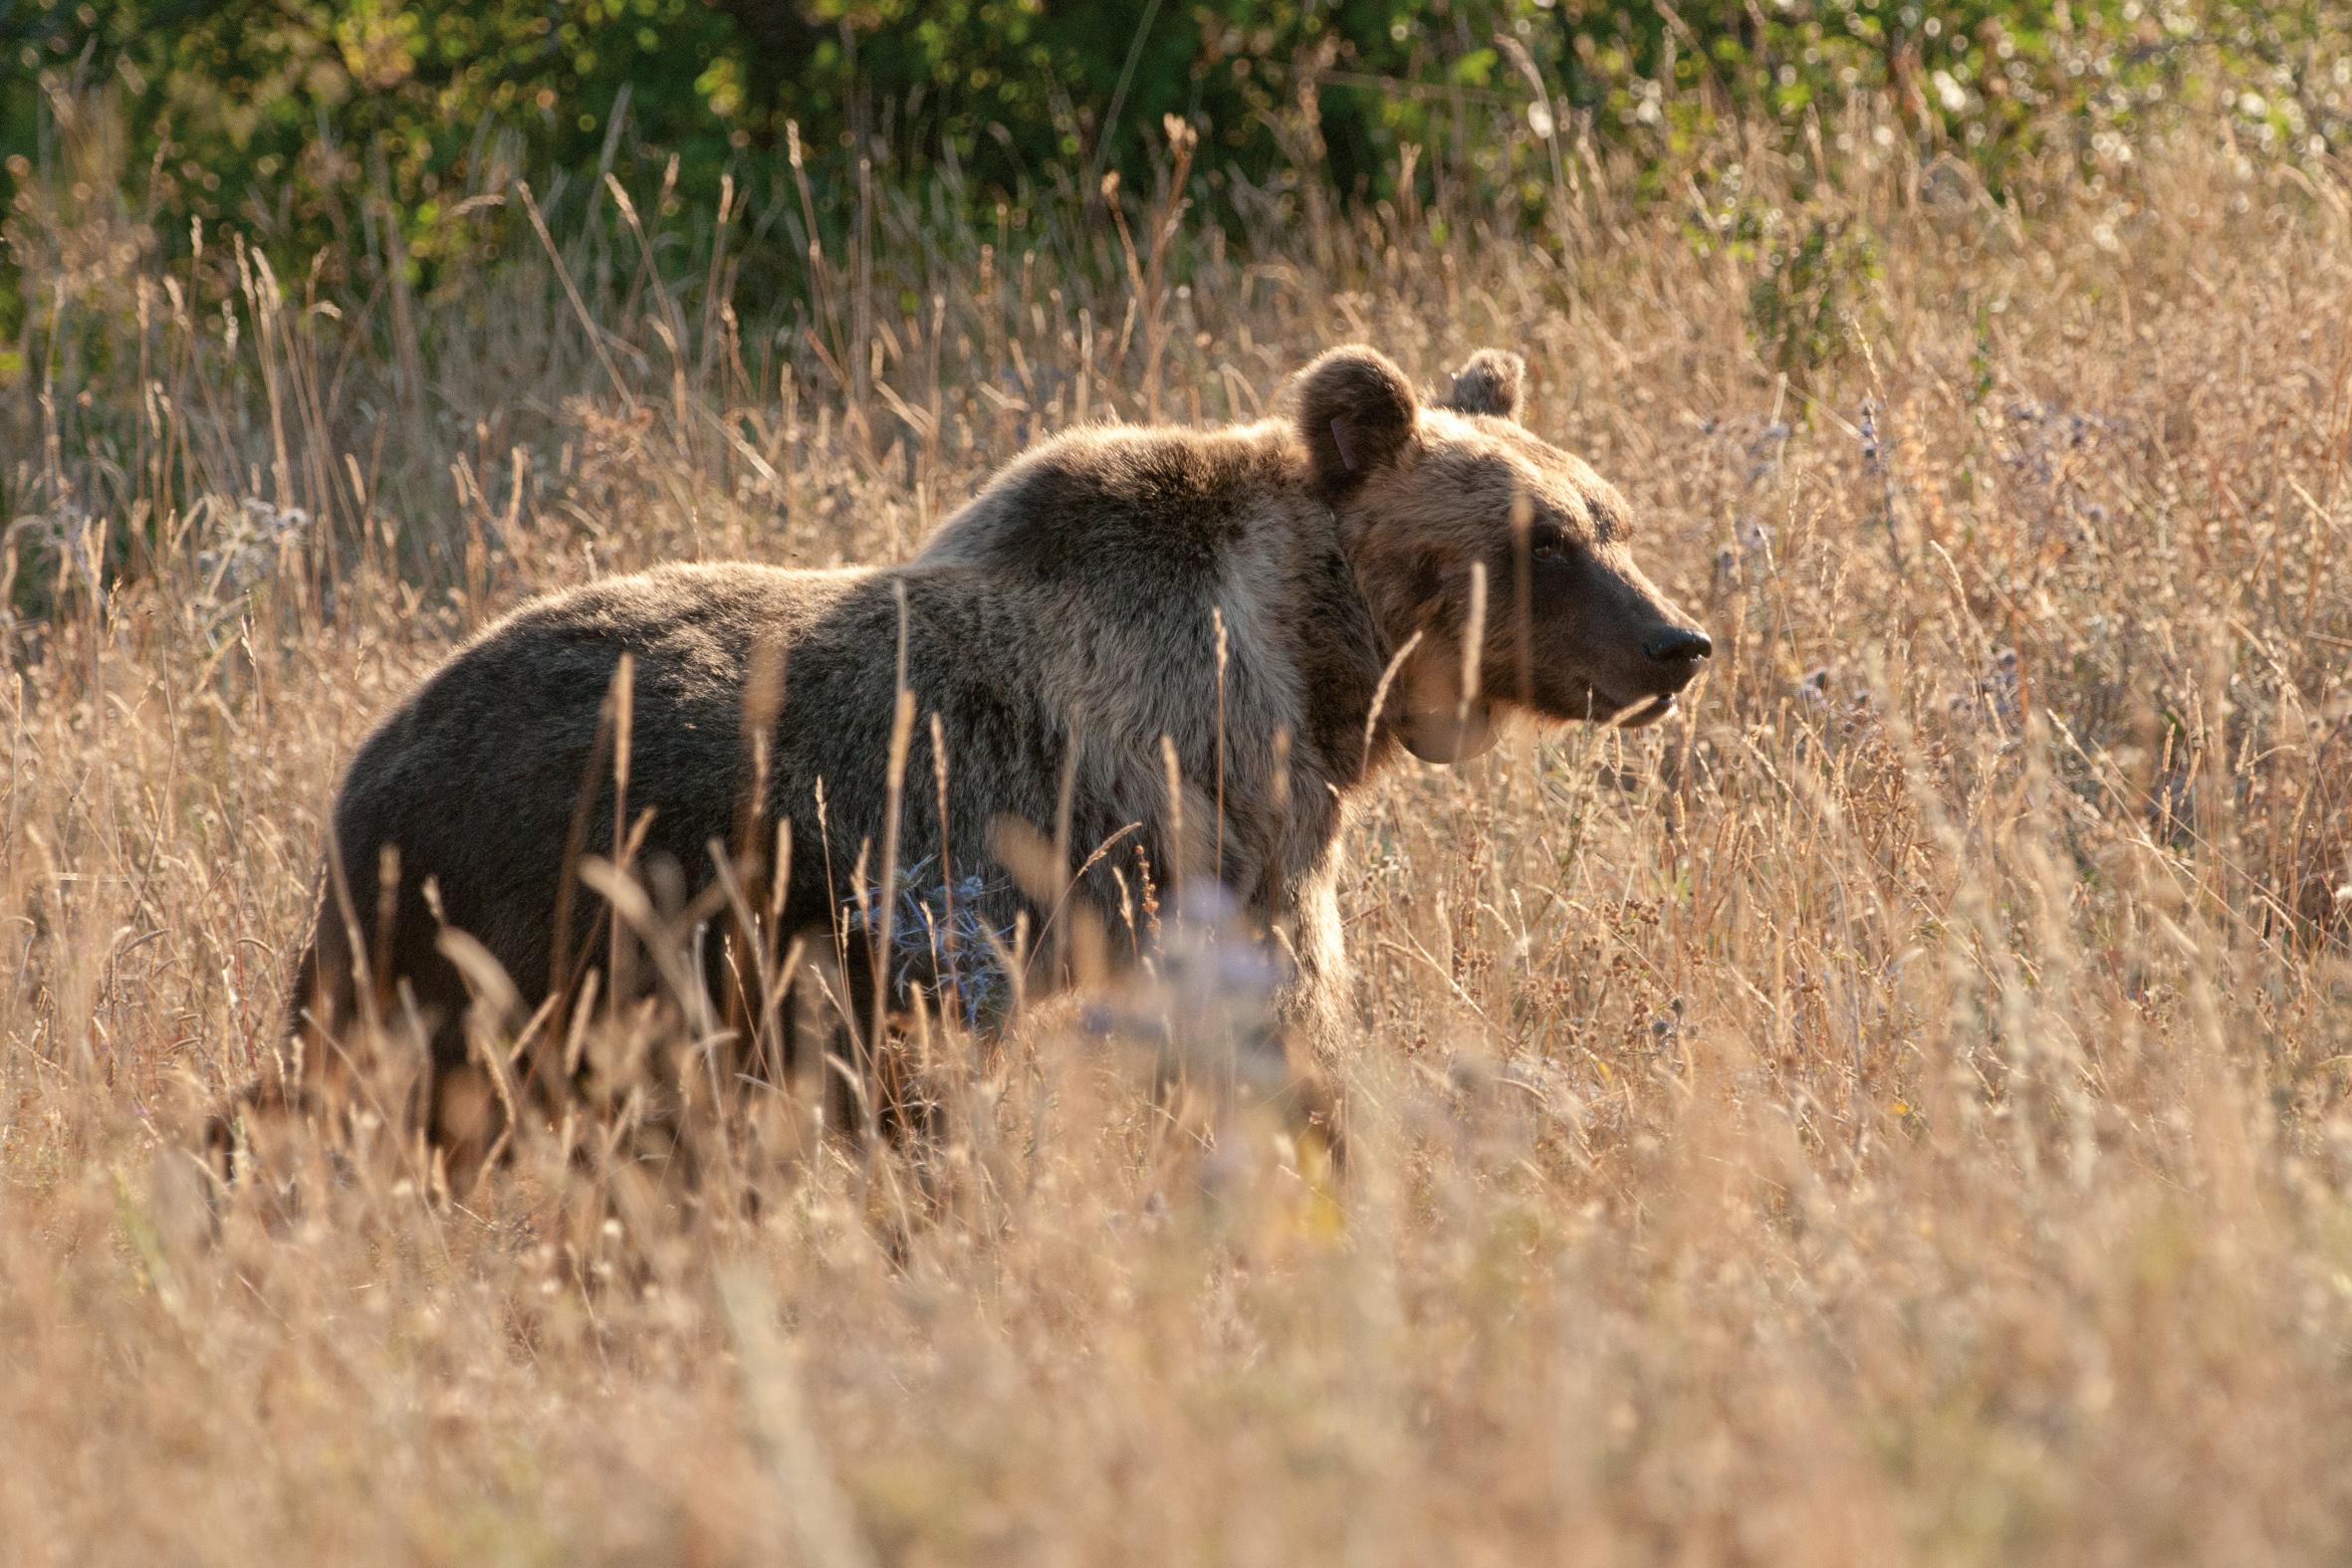 The Marsican brown bear gets its name from a local tribe that pre-dated the Romans